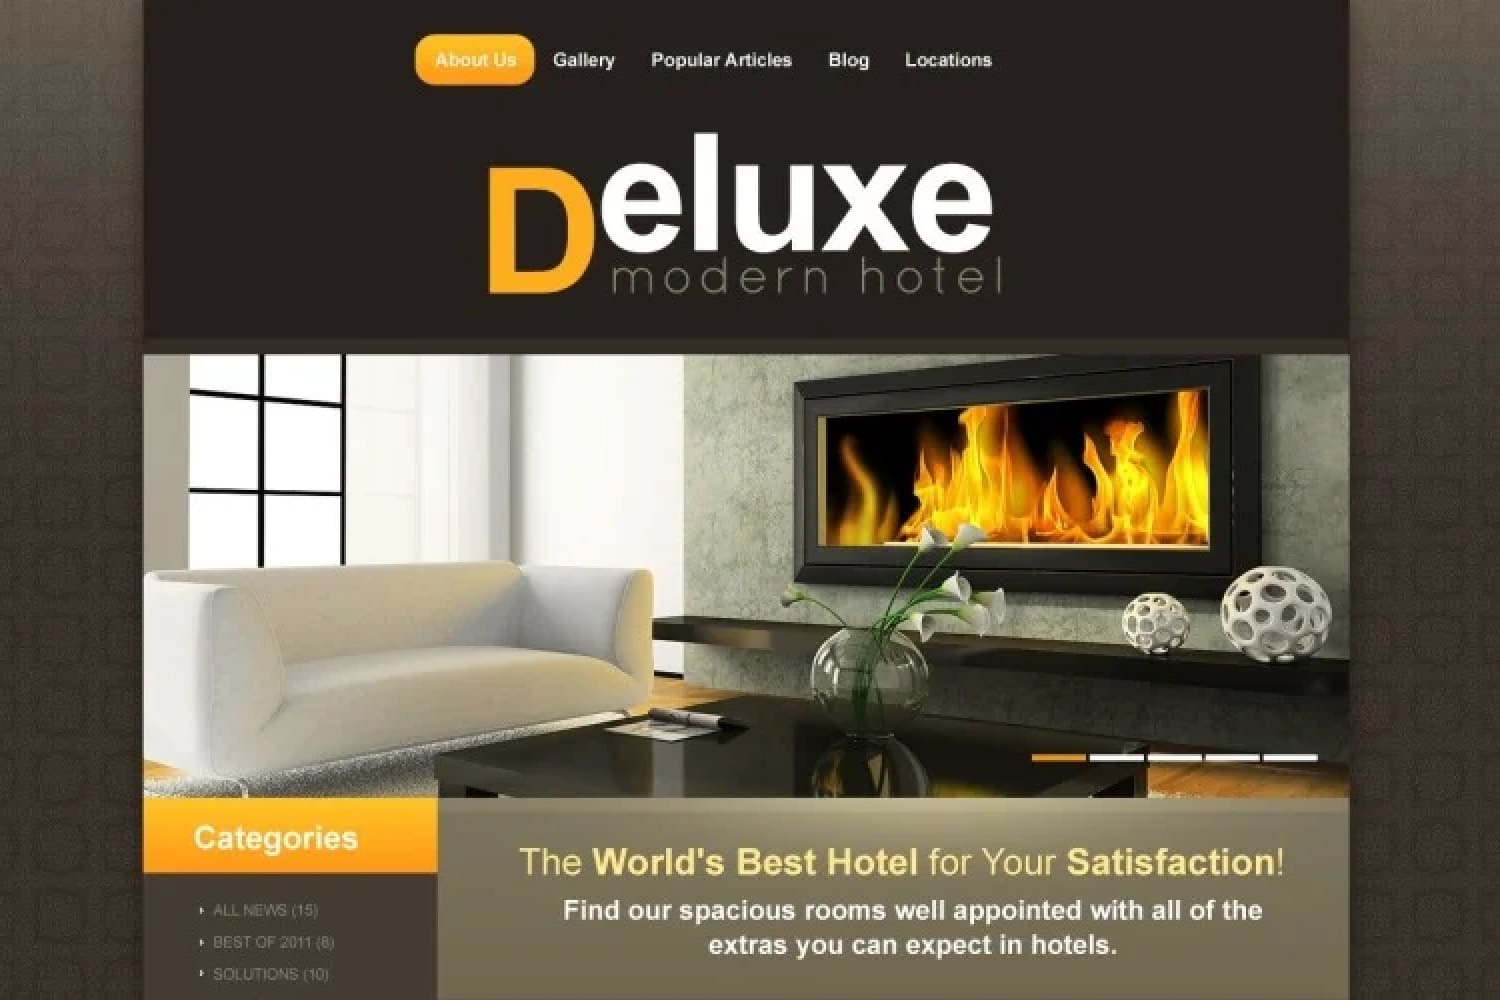 Hotel website home page with photo of lobby with fireplace.